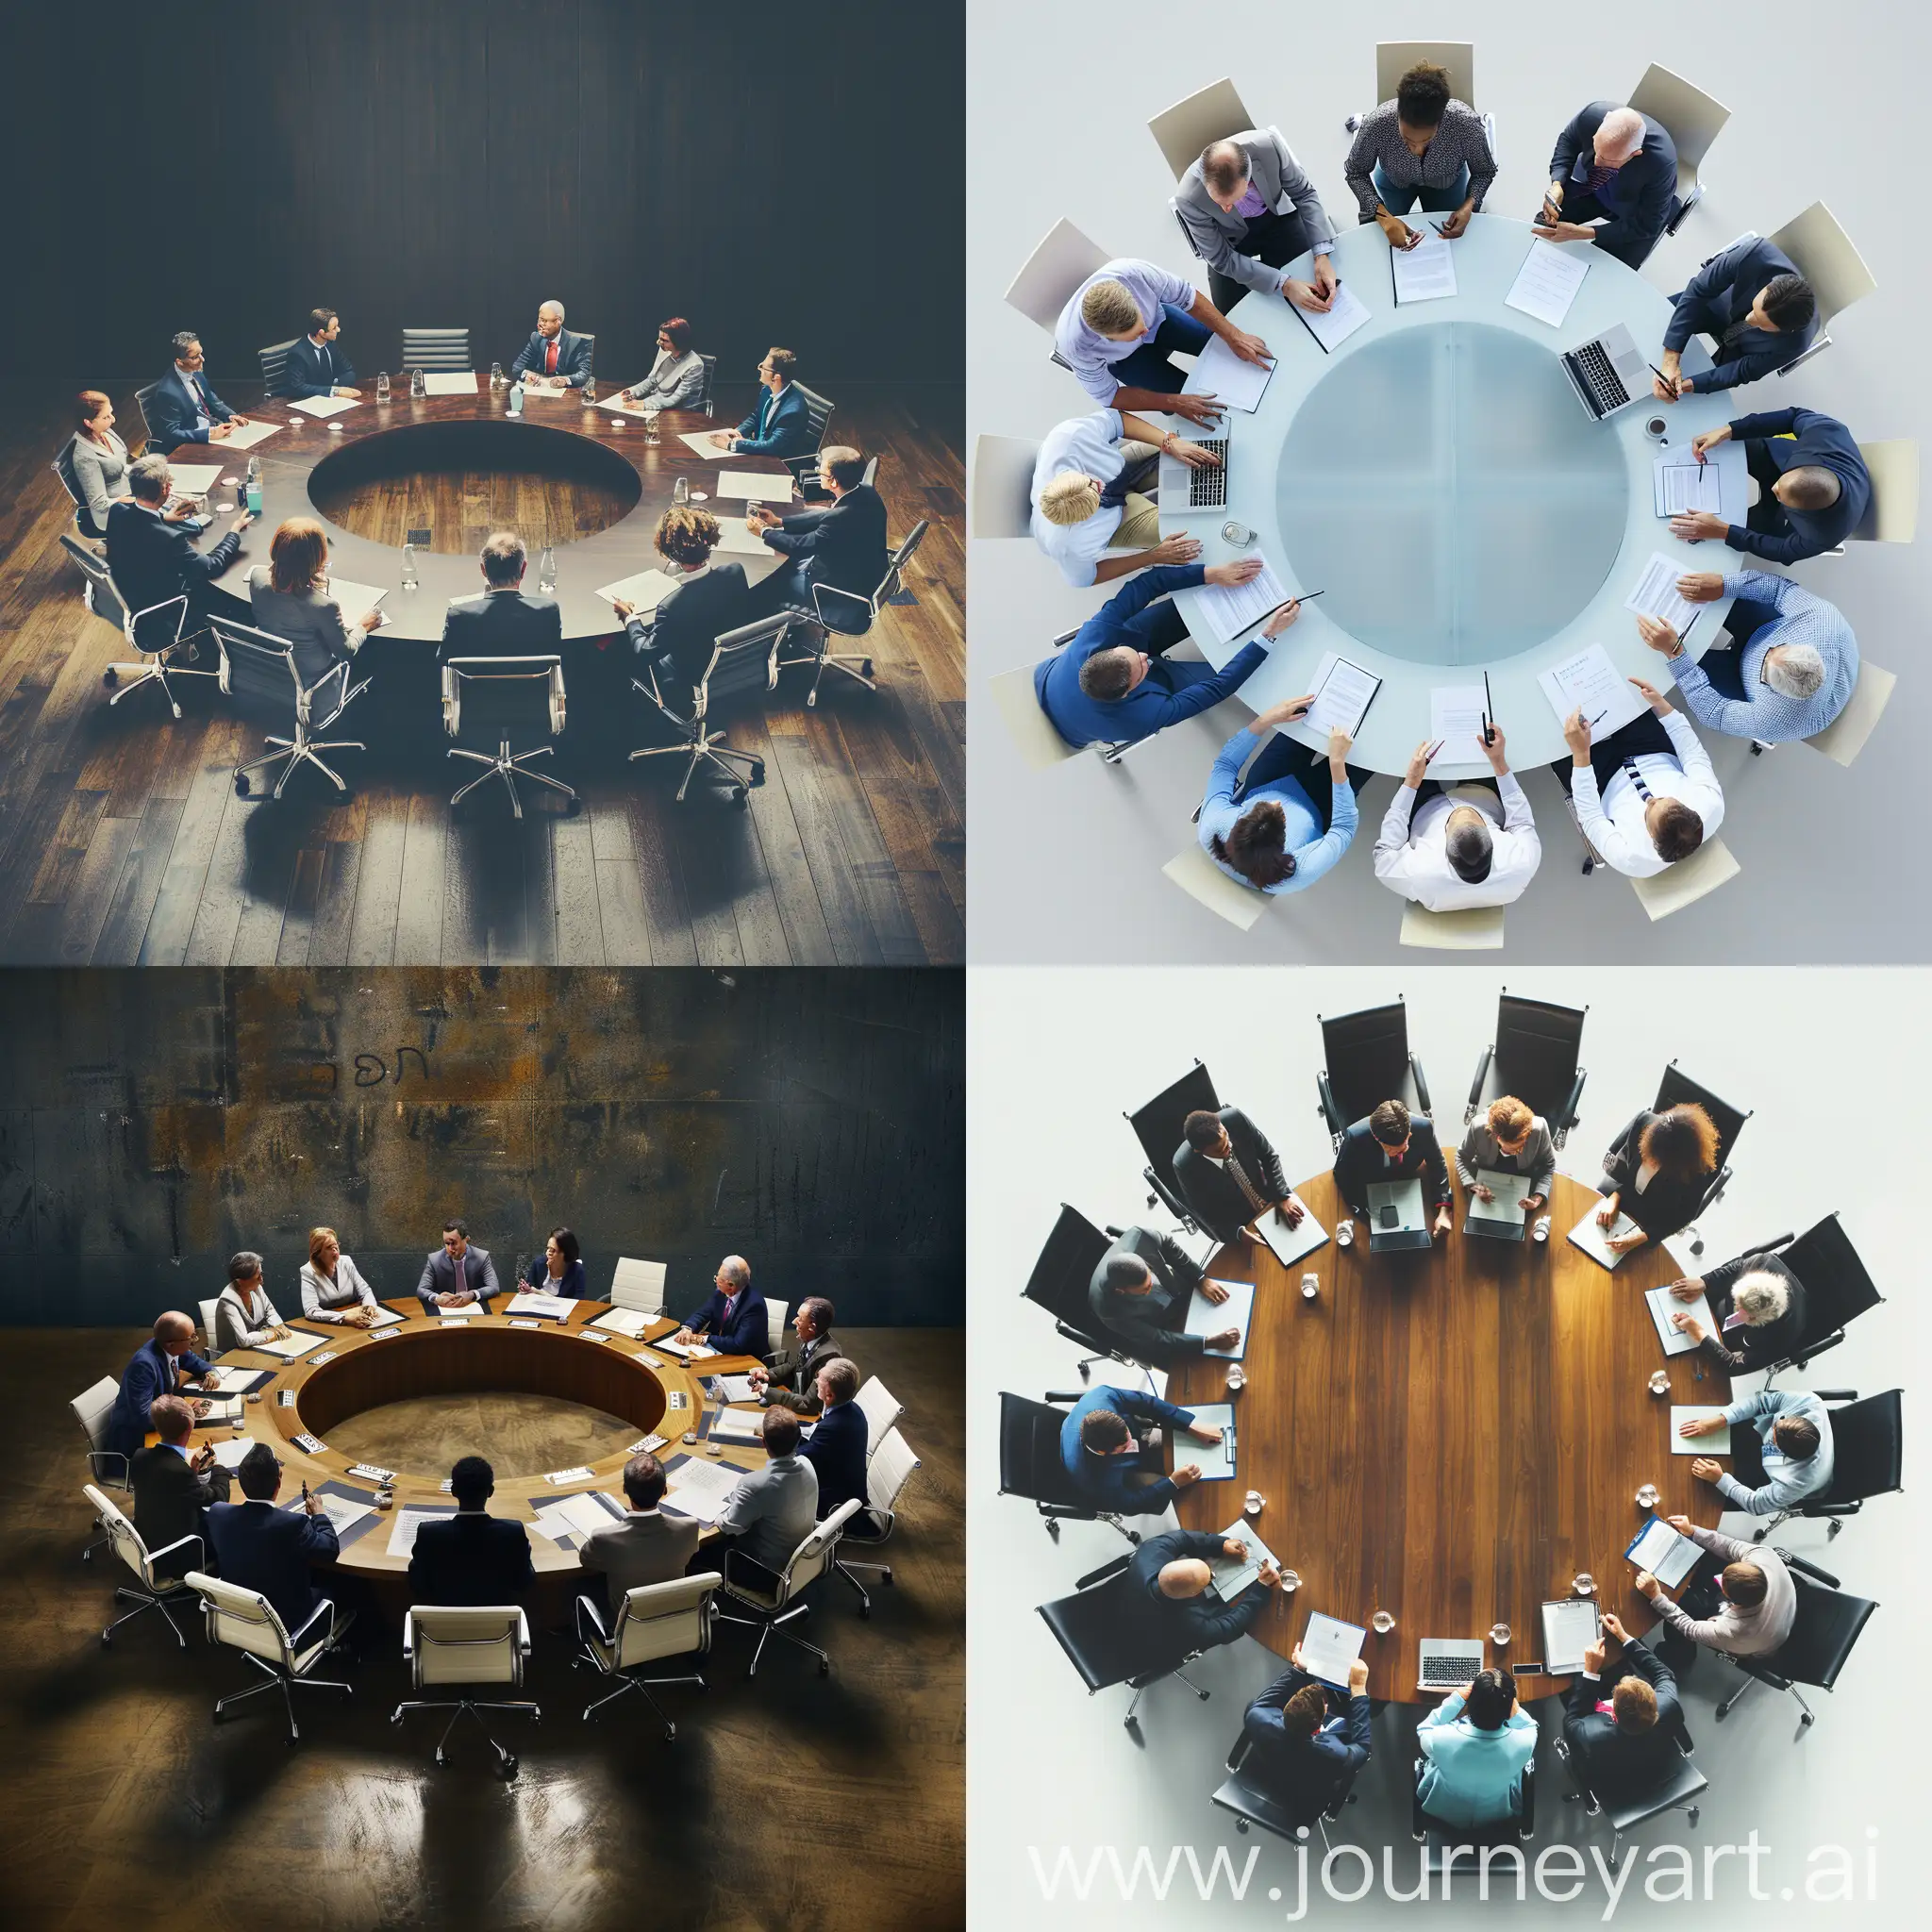 10 professionals sitting around a circular table having a discussion 
